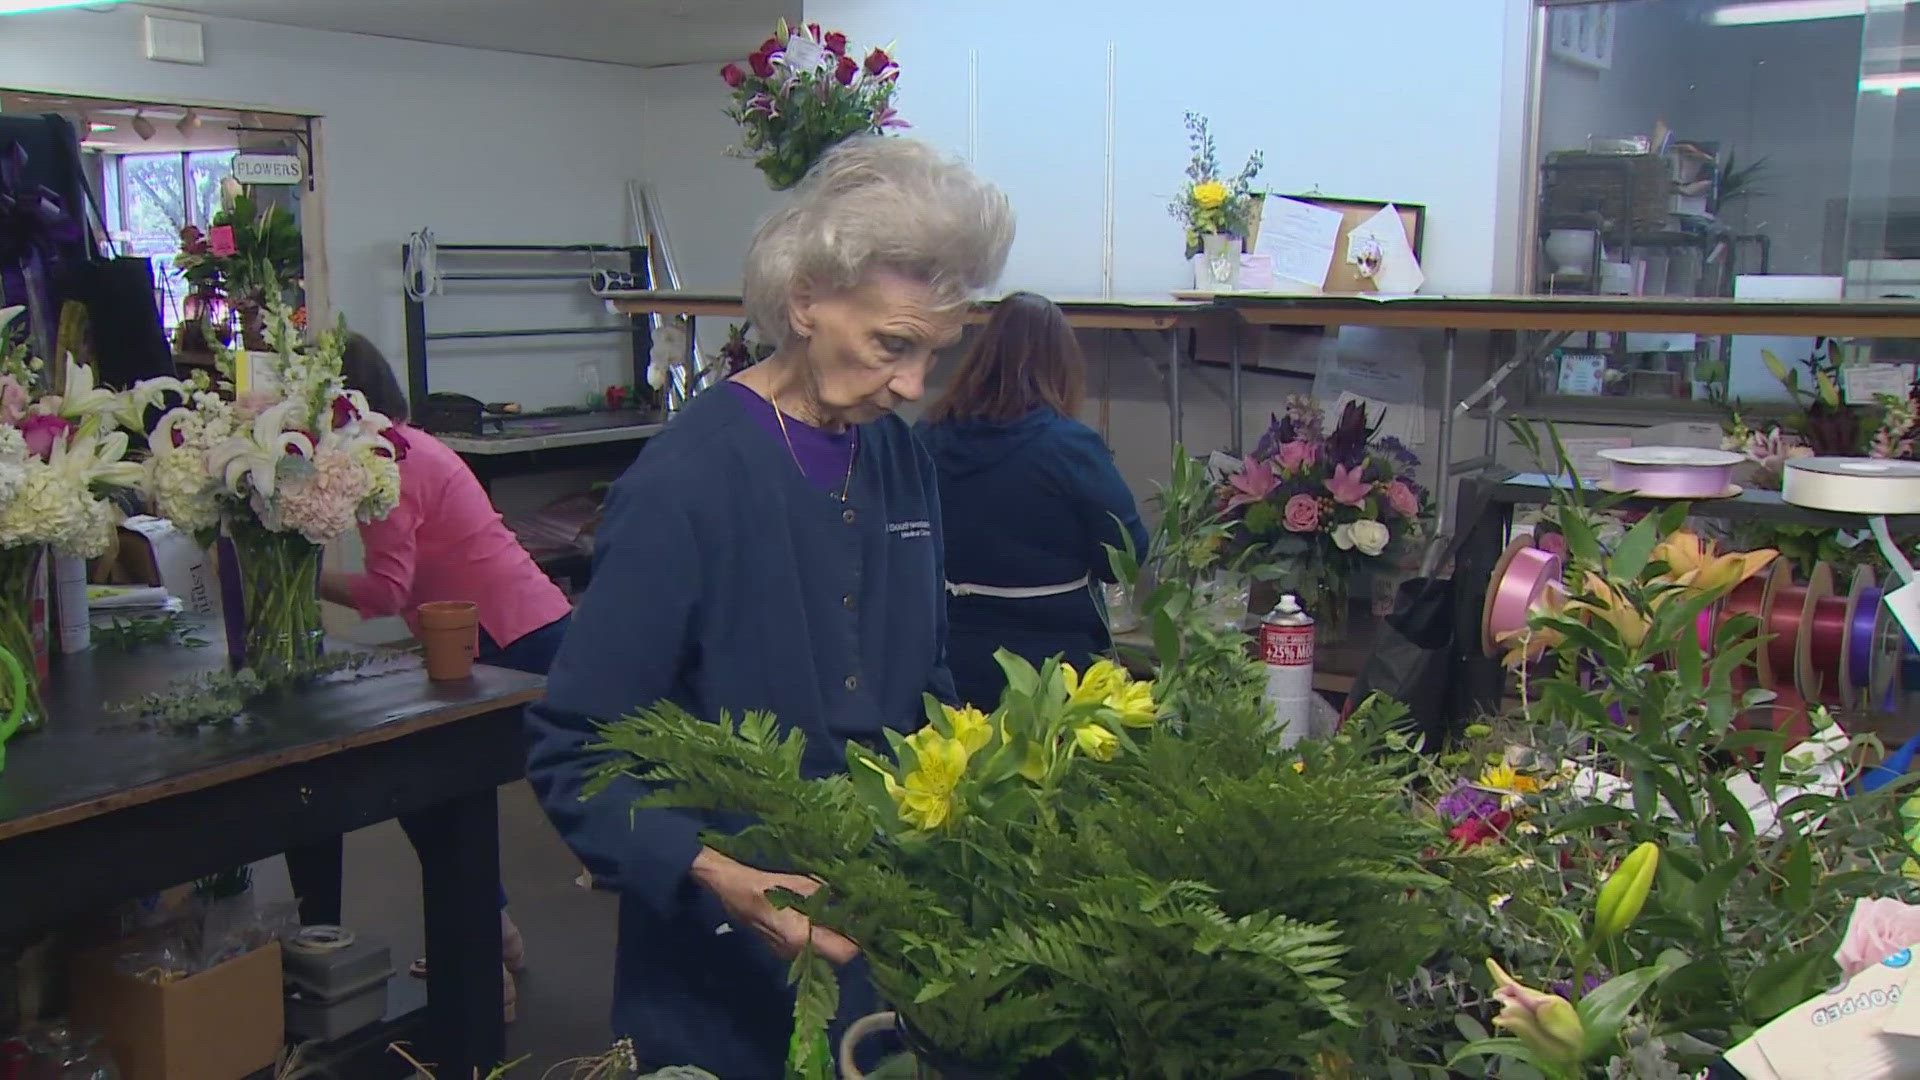 It's on of the busiest weekends of the year for florists.